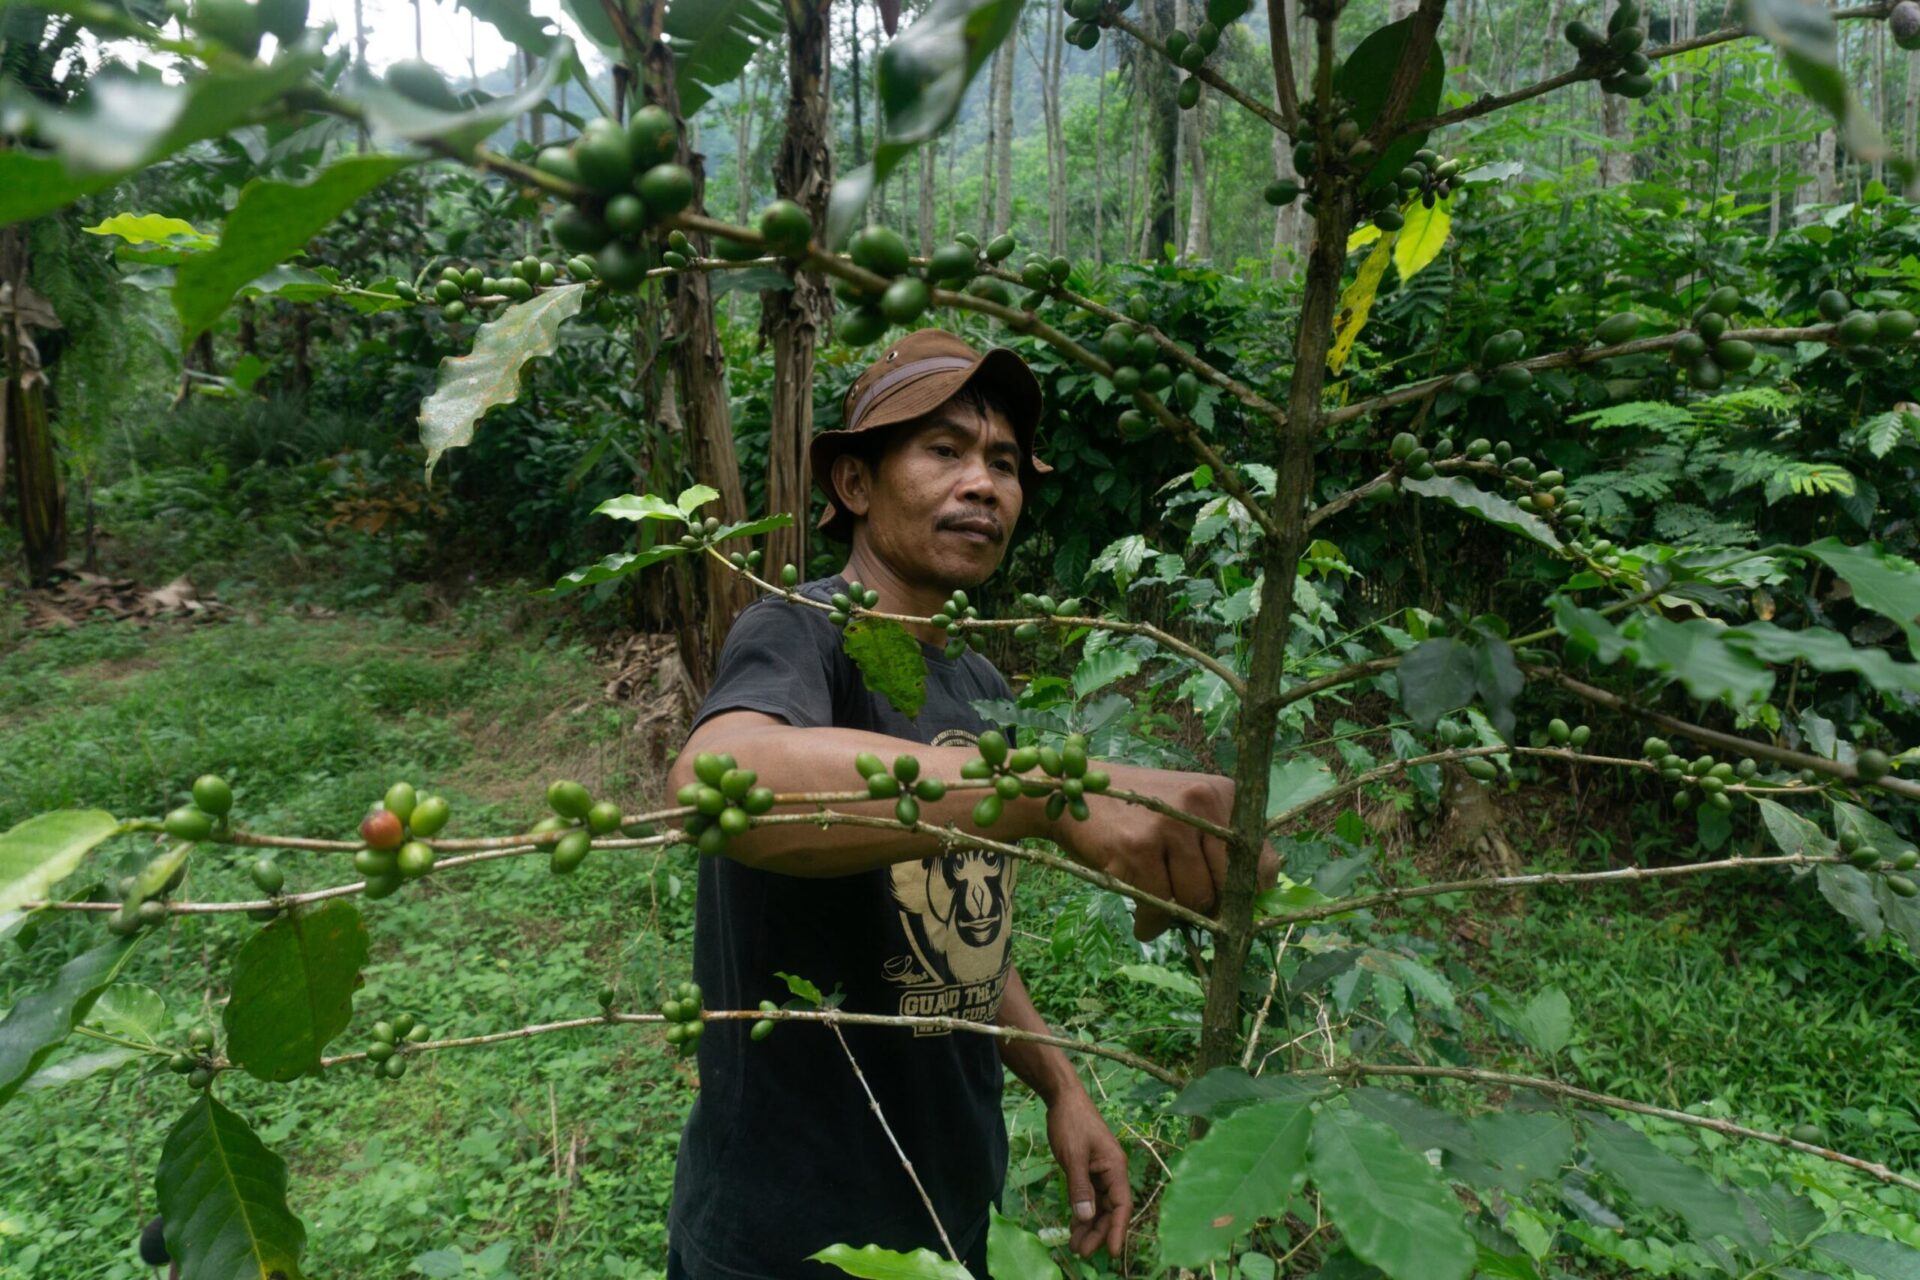 Tasuri, former wildlife, and wood hunter taking care of a coffee tree that grows wild in a tropical rain forest in Pekalongan, Central Java, Indonesia